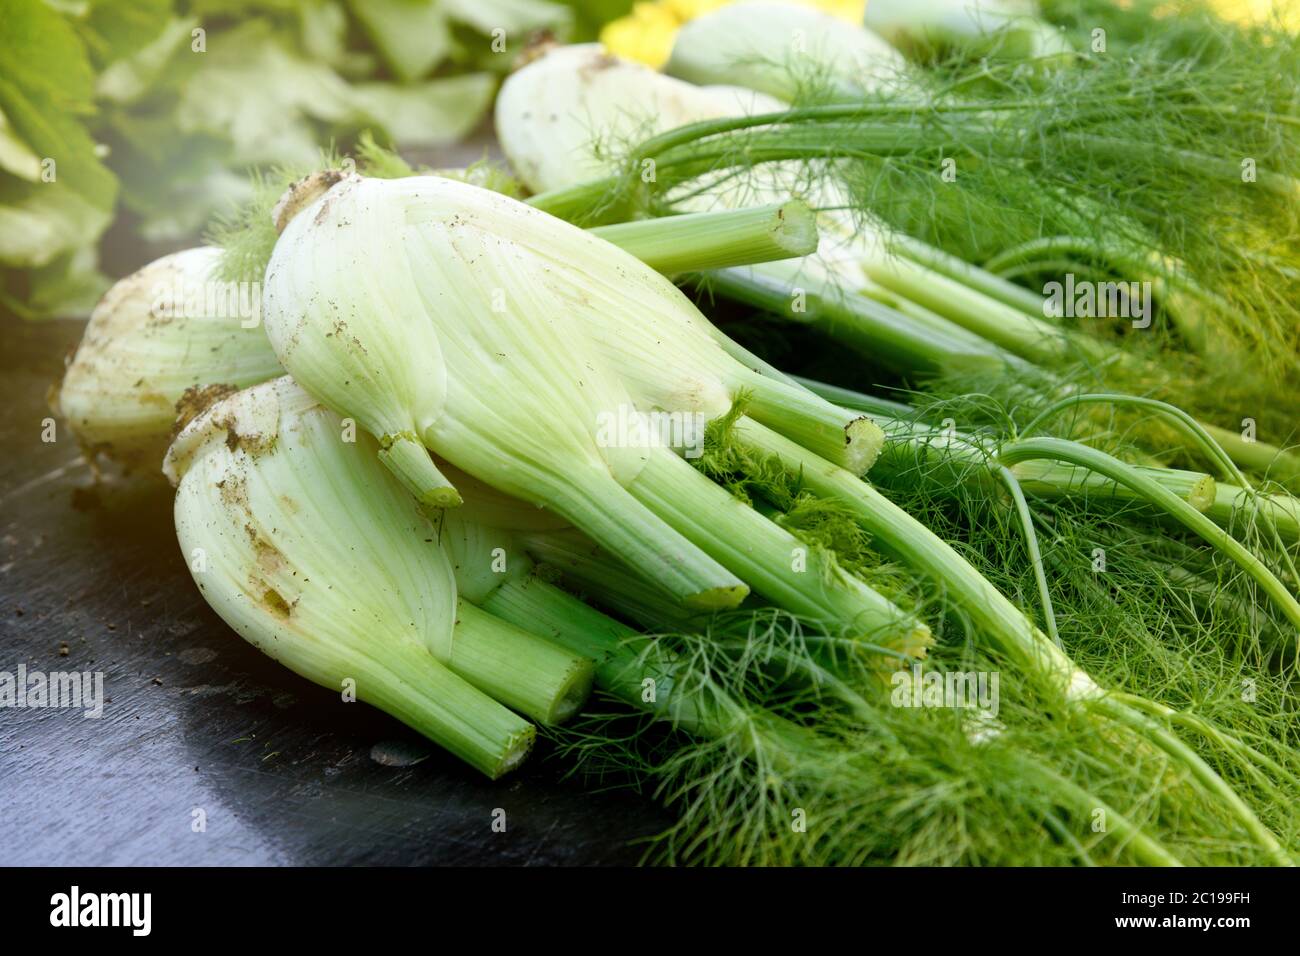 Crop of healthy freshly harvested fennel at a farmers market displayed outdoors on a table in close up Stock Photo